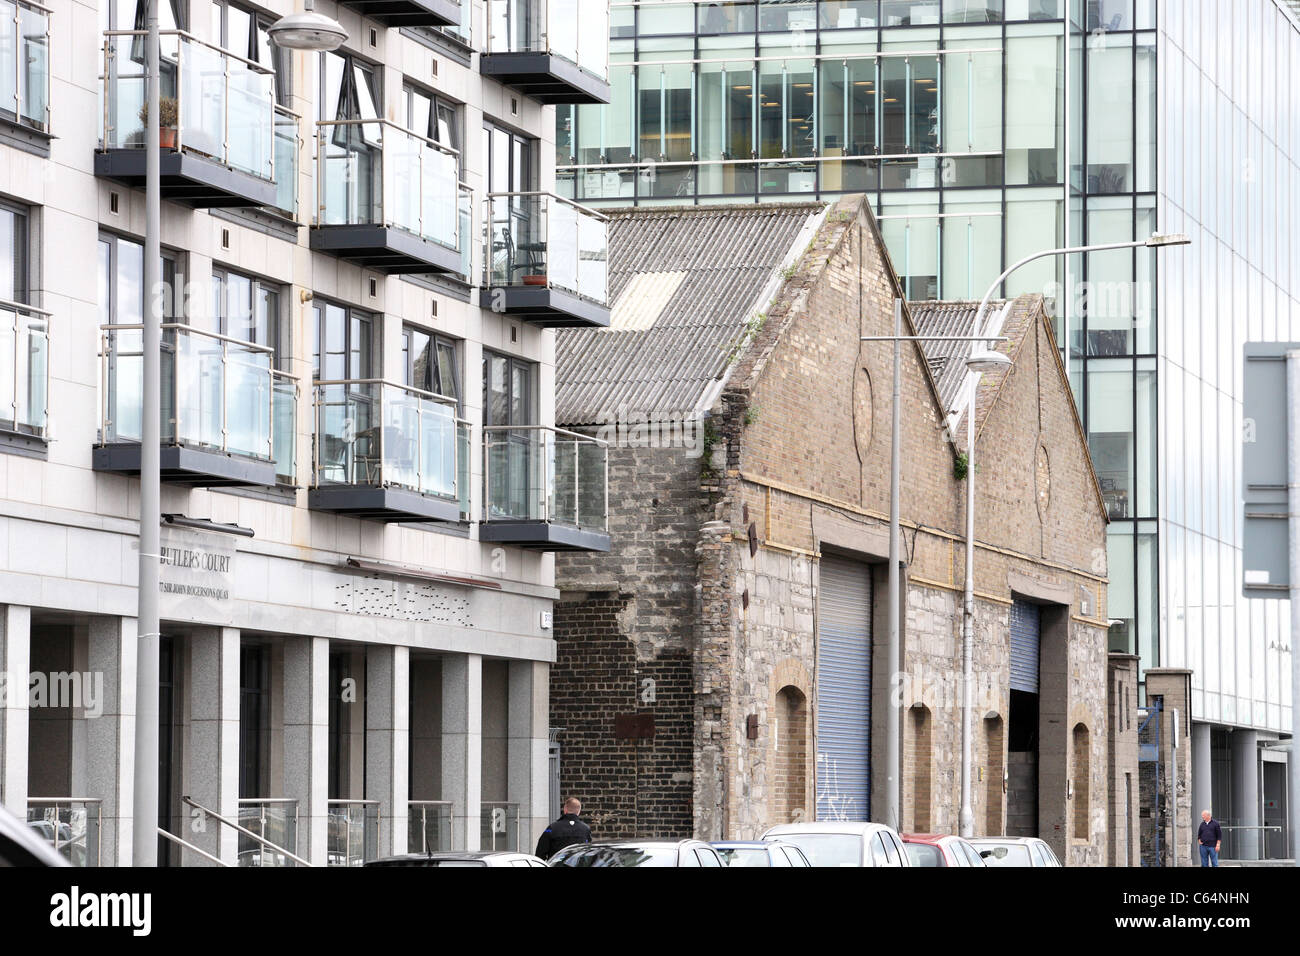 Old and new buildings Dublin Ireland Stock Photo